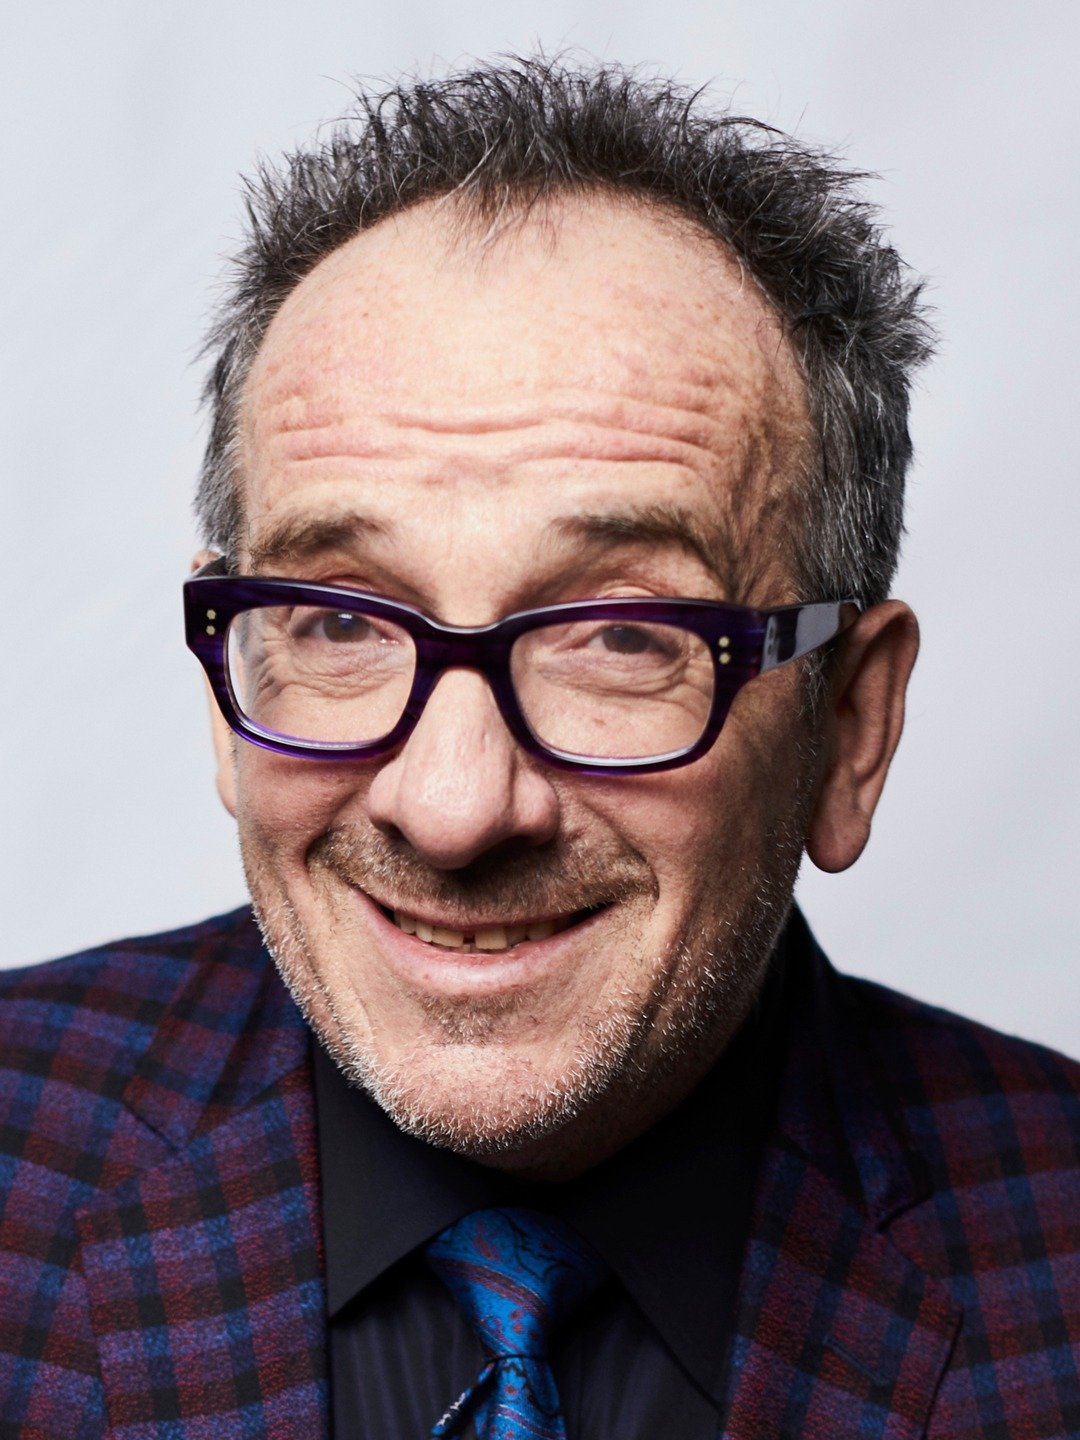 How tall is Elvis Costello?